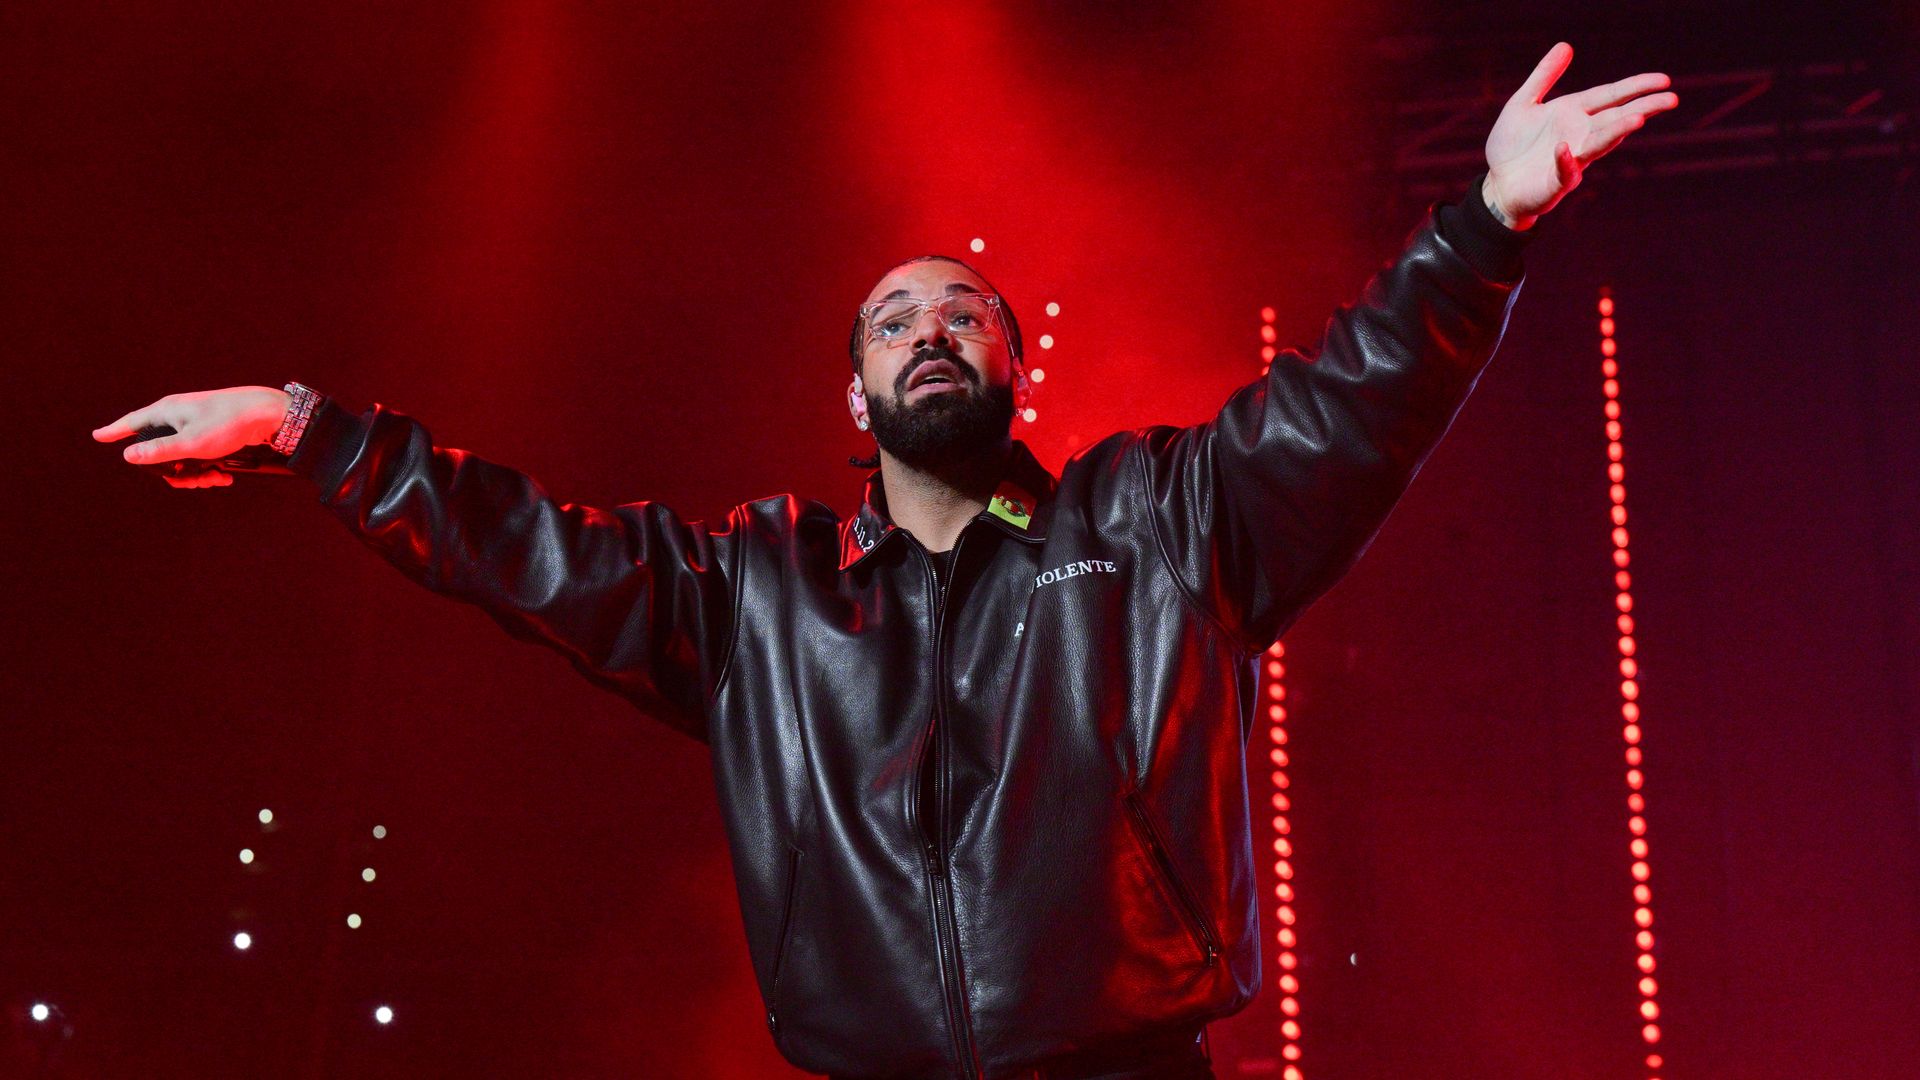 Drake performs on stage with his arms outstretched